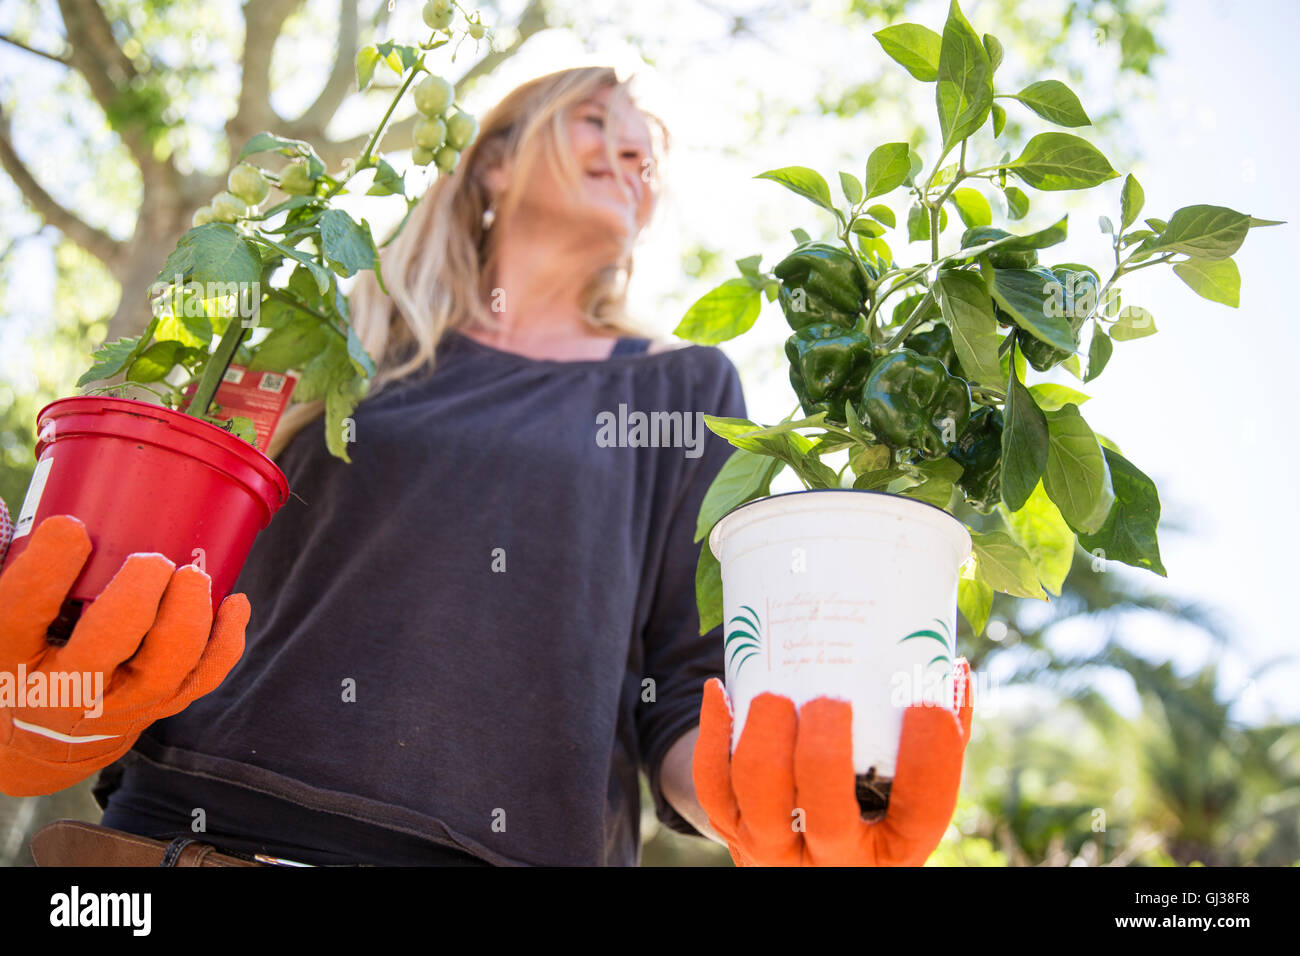 Low angle view of woman holding plants in garden Banque D'Images